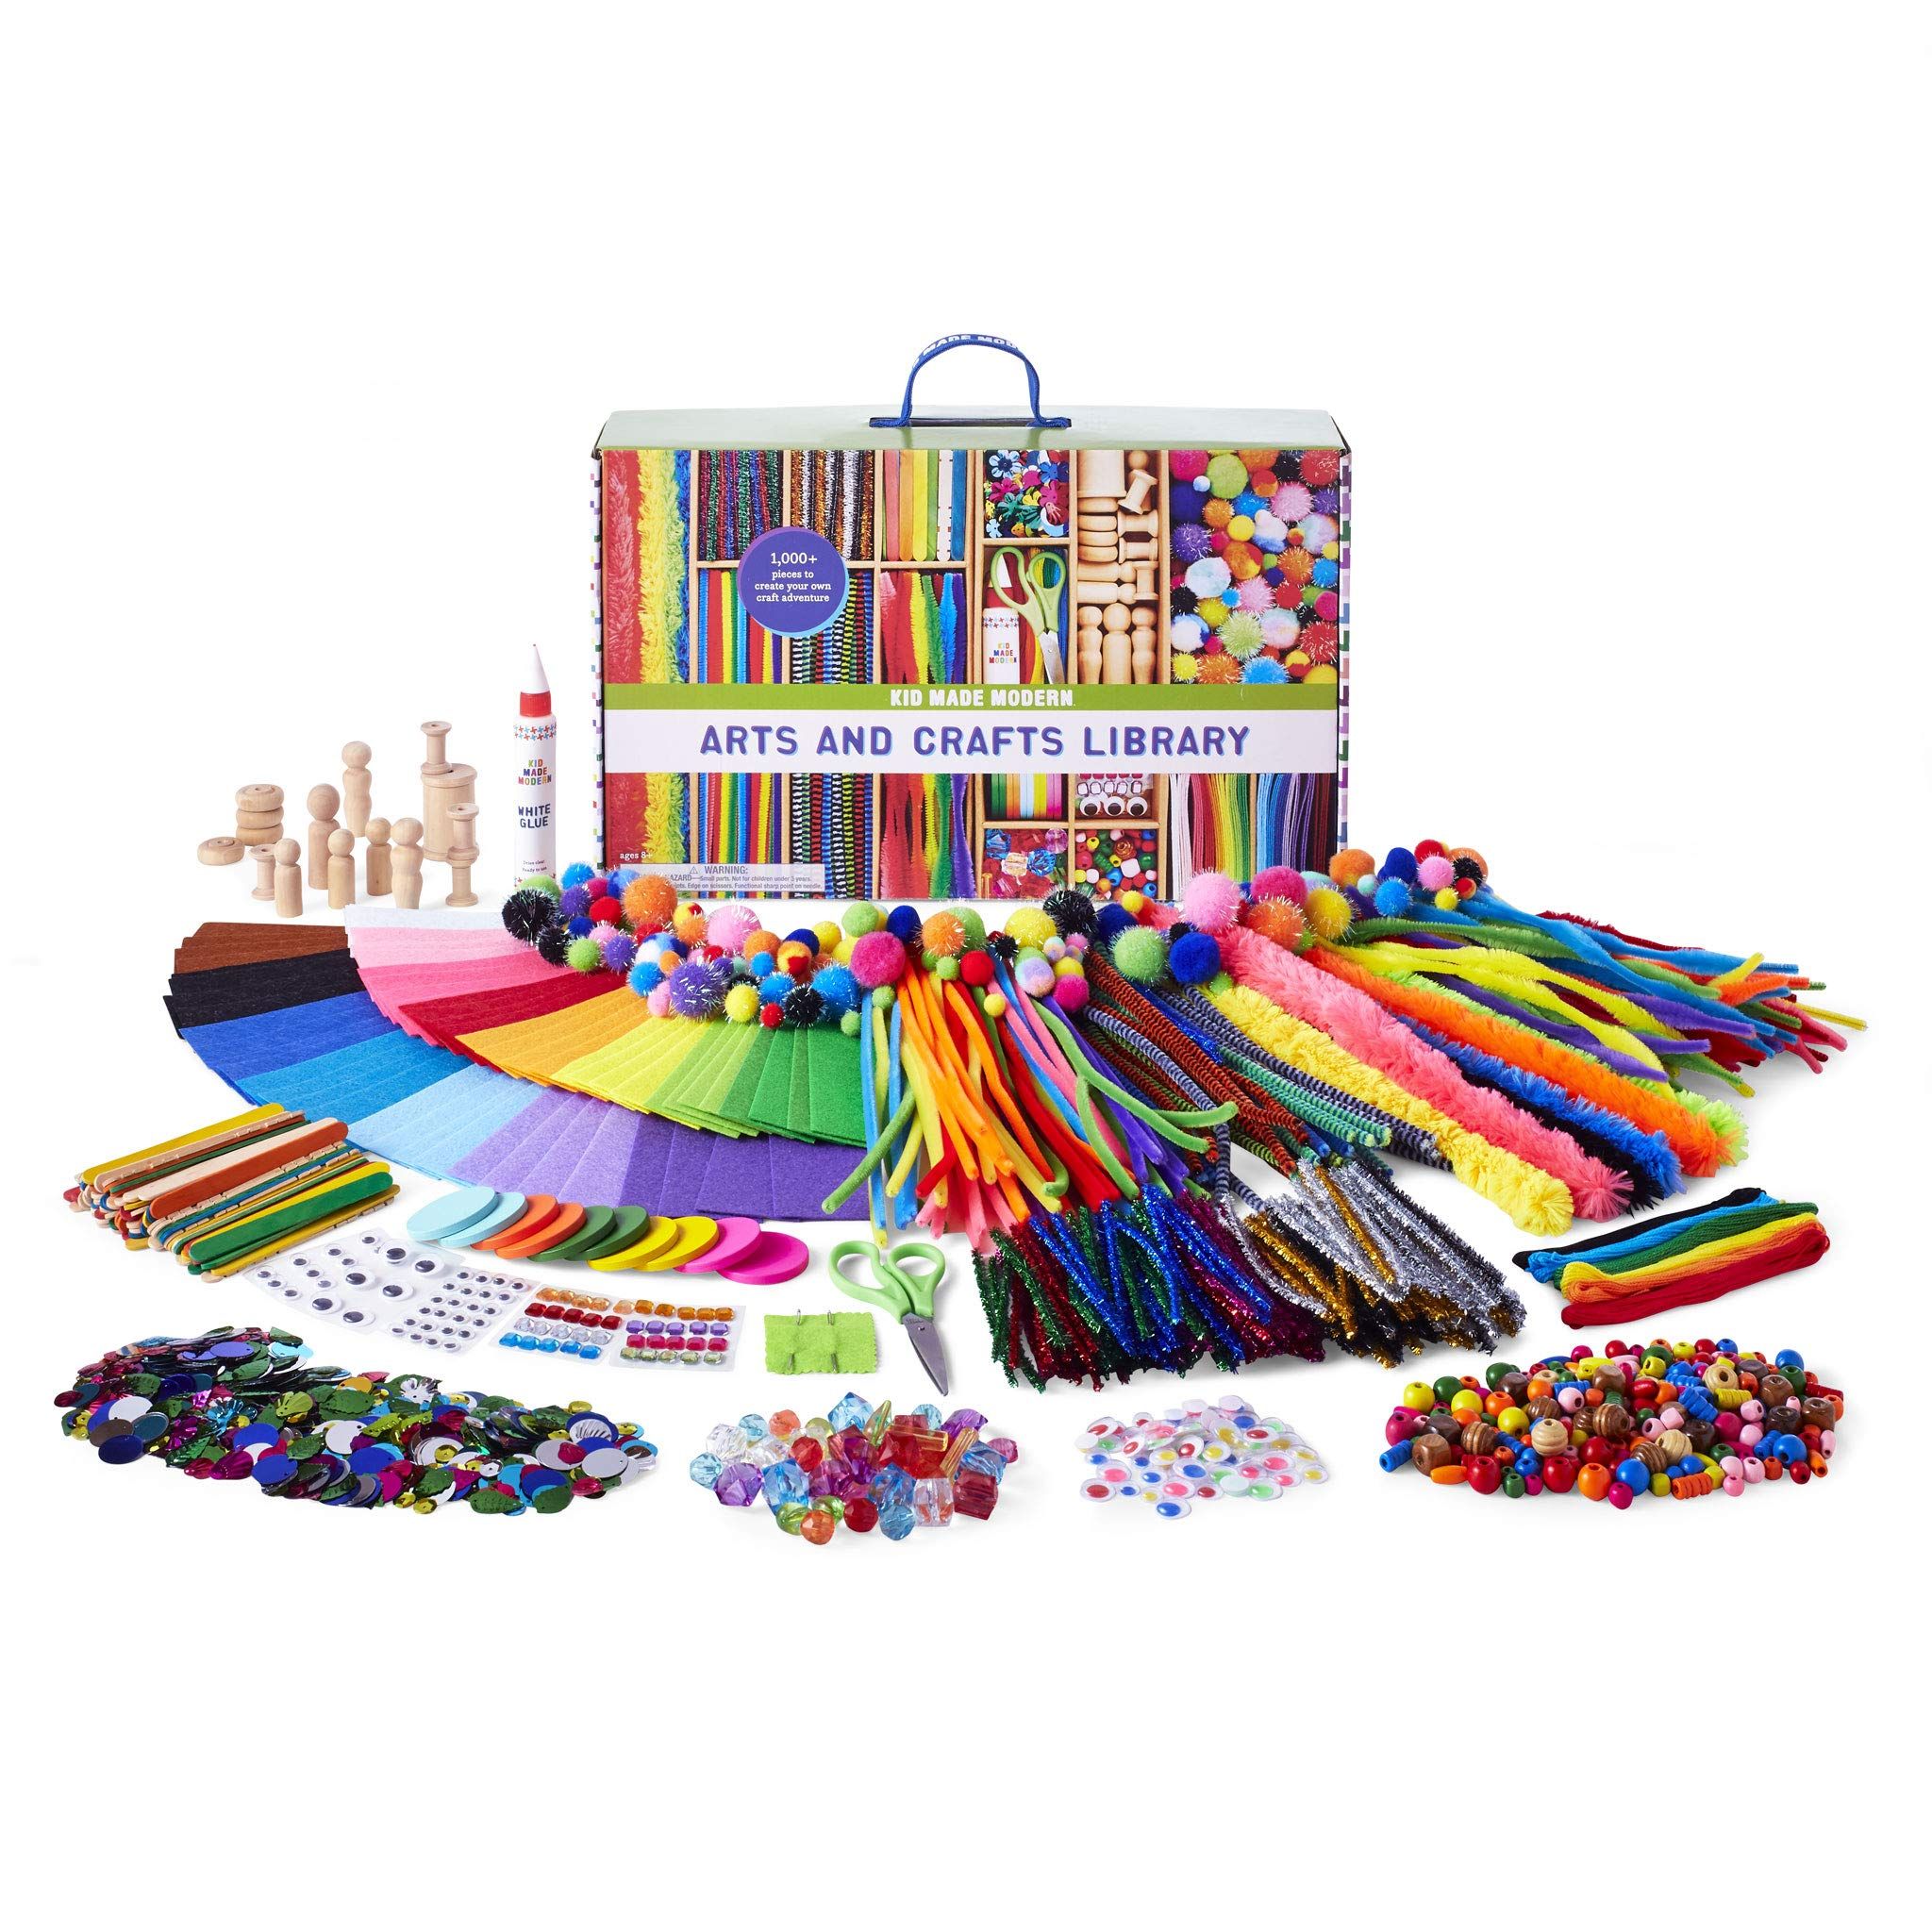 Kid Made Modern Arts and Crafts Supply Library - Coloring Arts and Crafts Kit | Amazon (US)